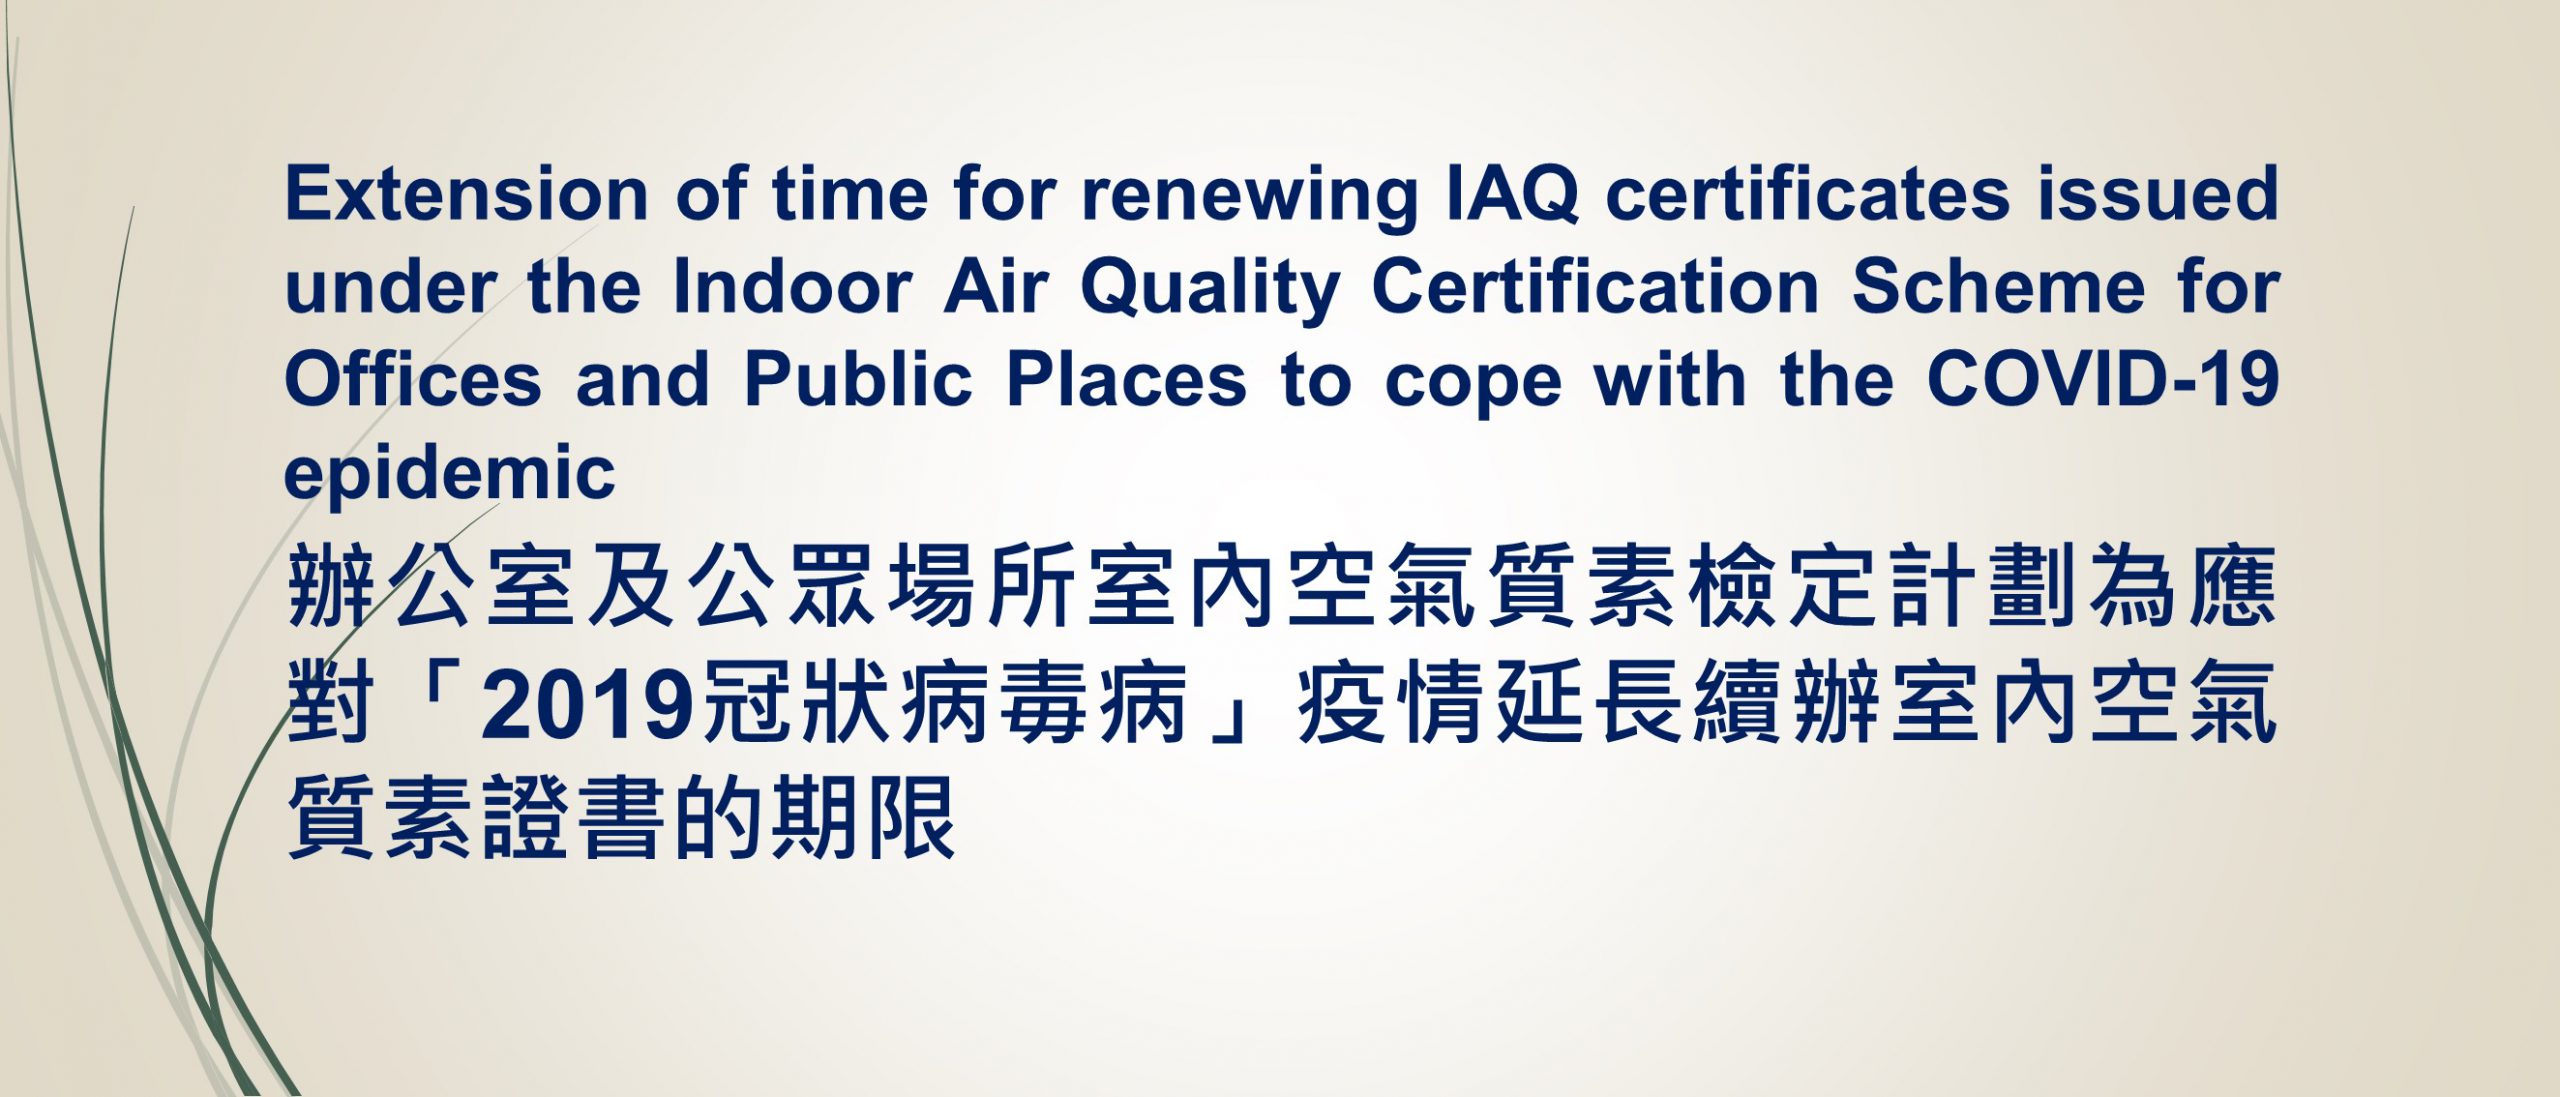 Extension of time for renewing IAQ certificates issued under the IAQ Certification Scheme for Offices and Public Places to cope with the COVID-19 epidemic